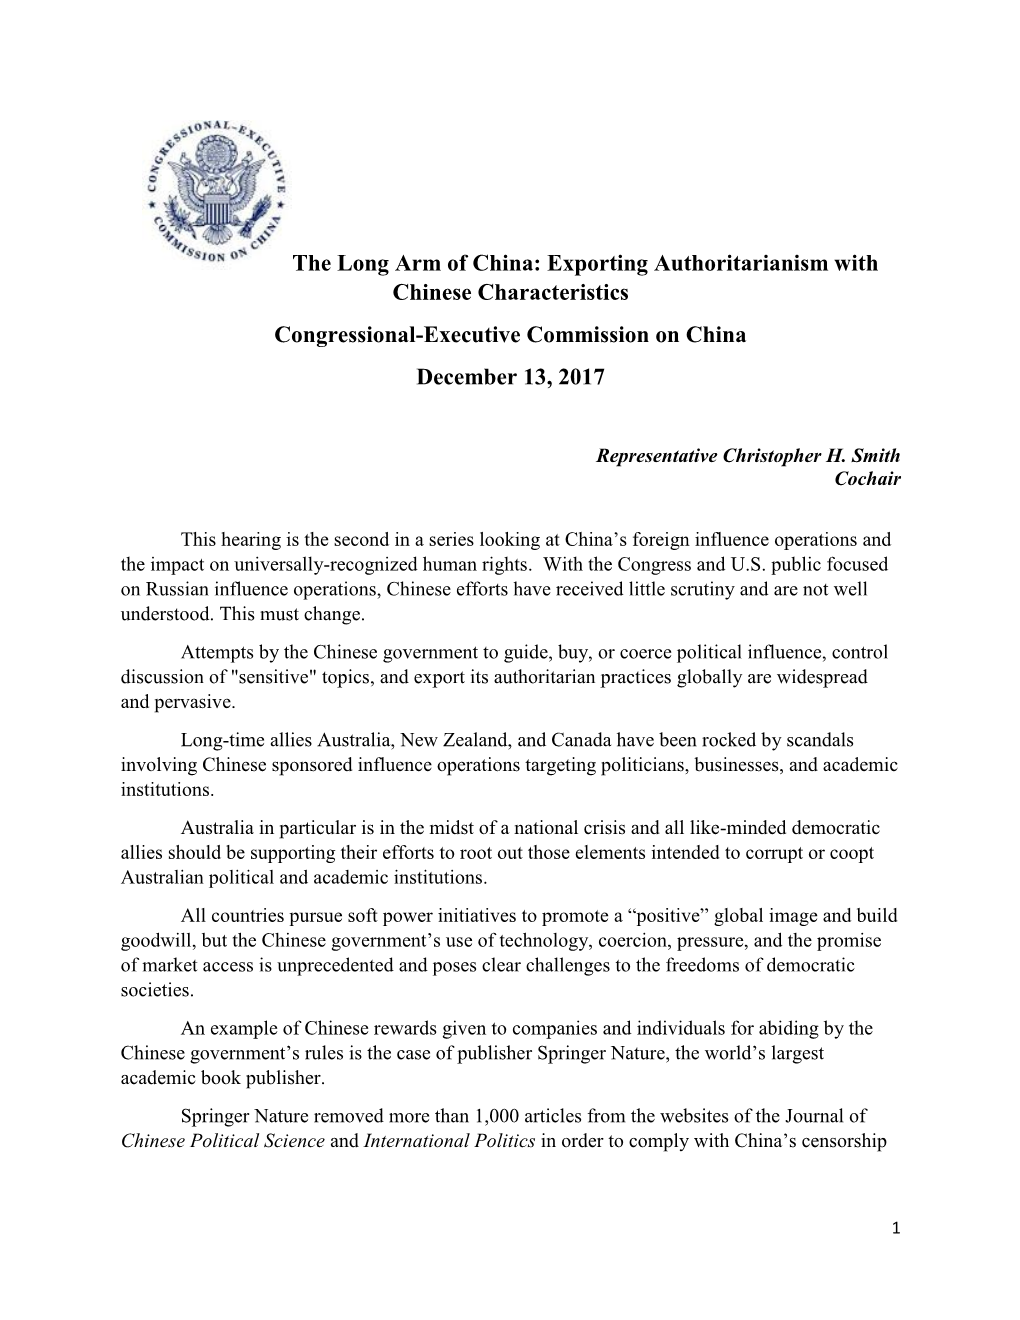 The Long Arm of China: Exporting Authoritarianism with Chinese Characteristics Congressional-Executive Commission on China December 13, 2017